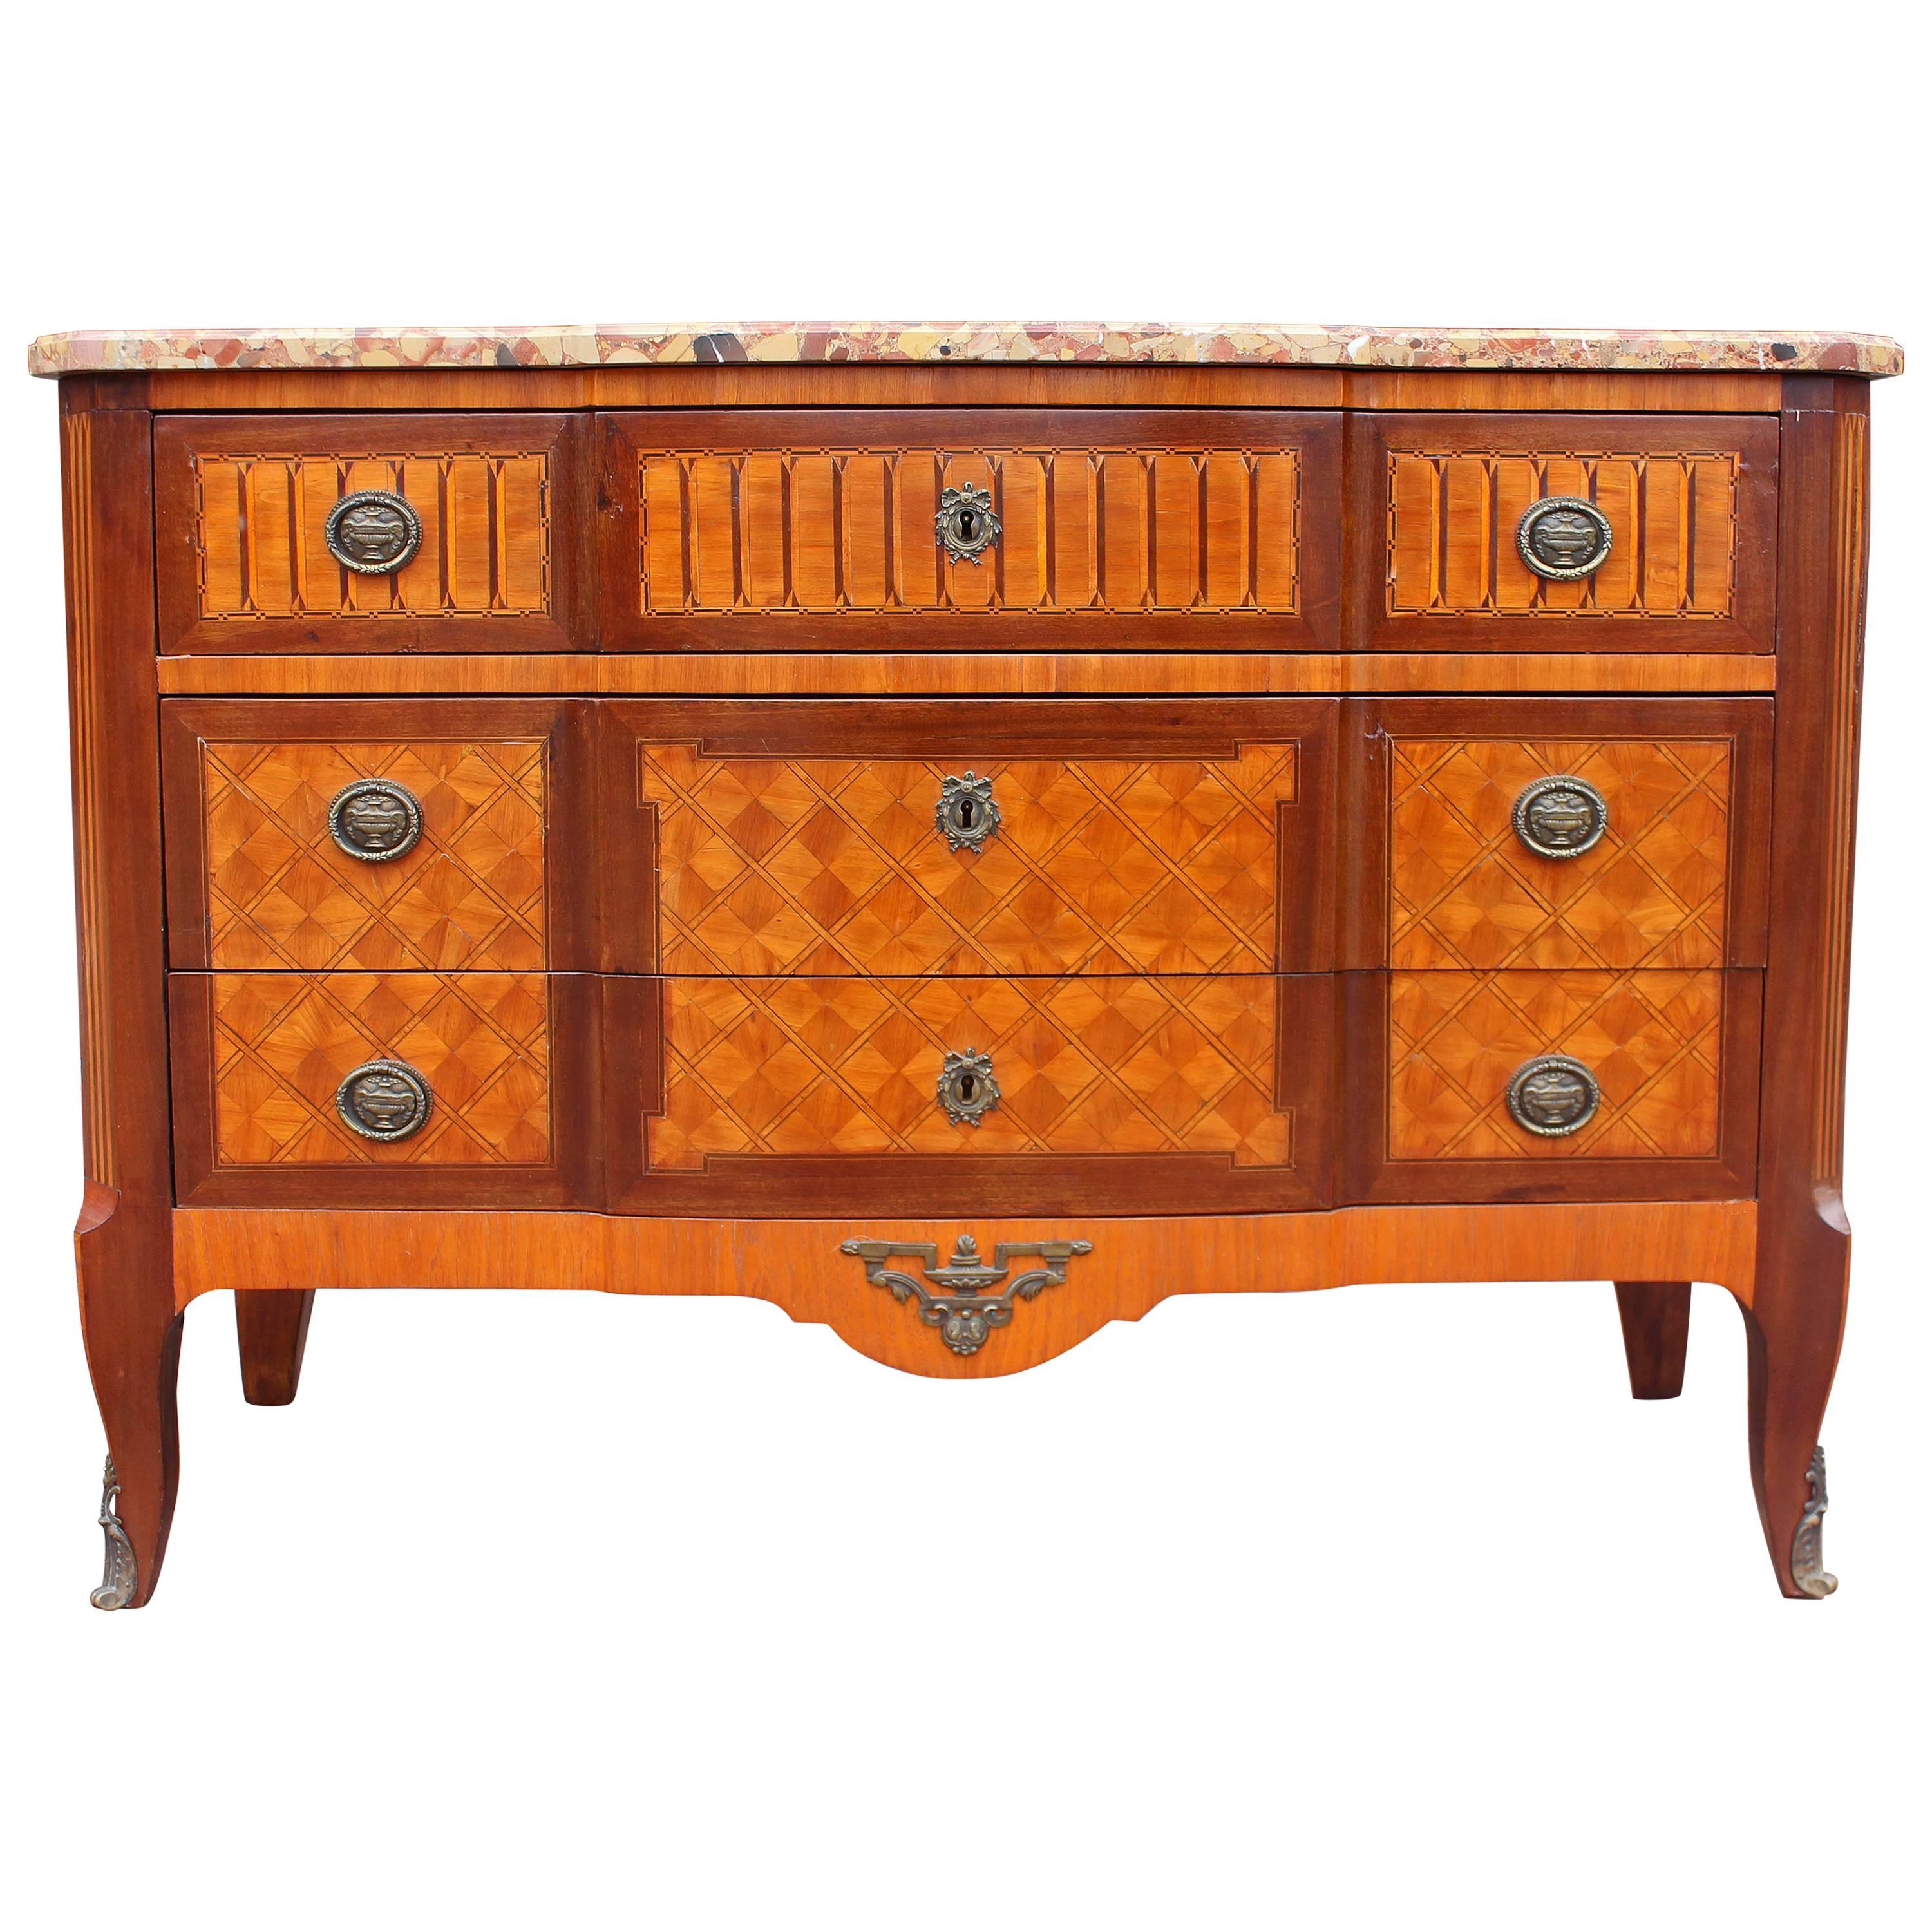 French neoclassical marble-top chest of drawers. Fine parquetry inlays with bronze mounts, mid-19th century.